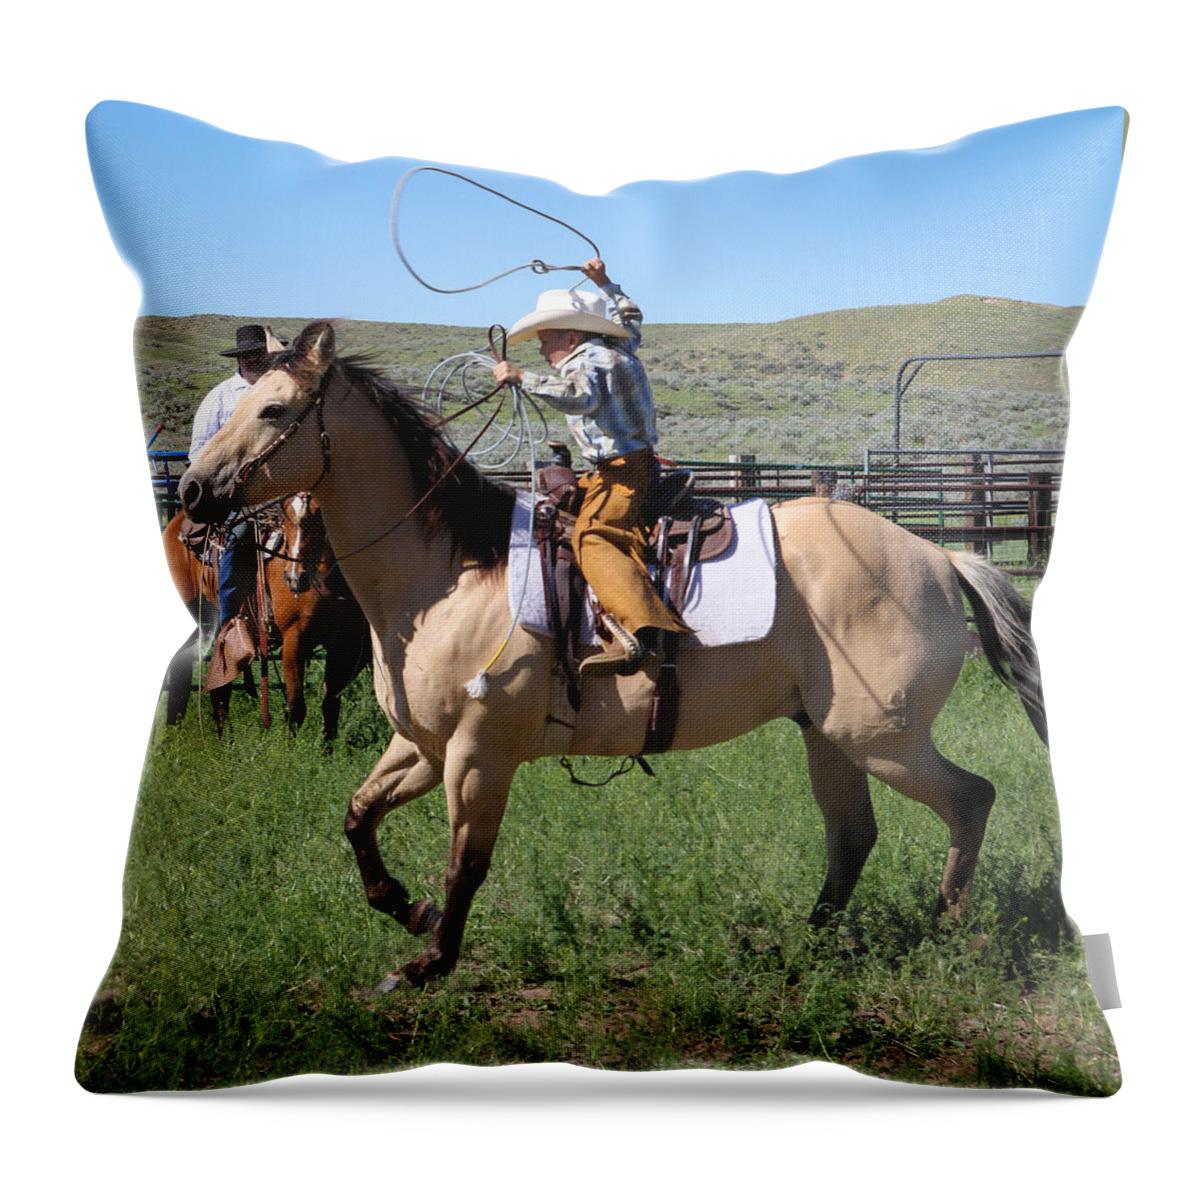 Wyoming 2014 Throw Pillow featuring the photograph Whipper Snapper by Diane Bohna